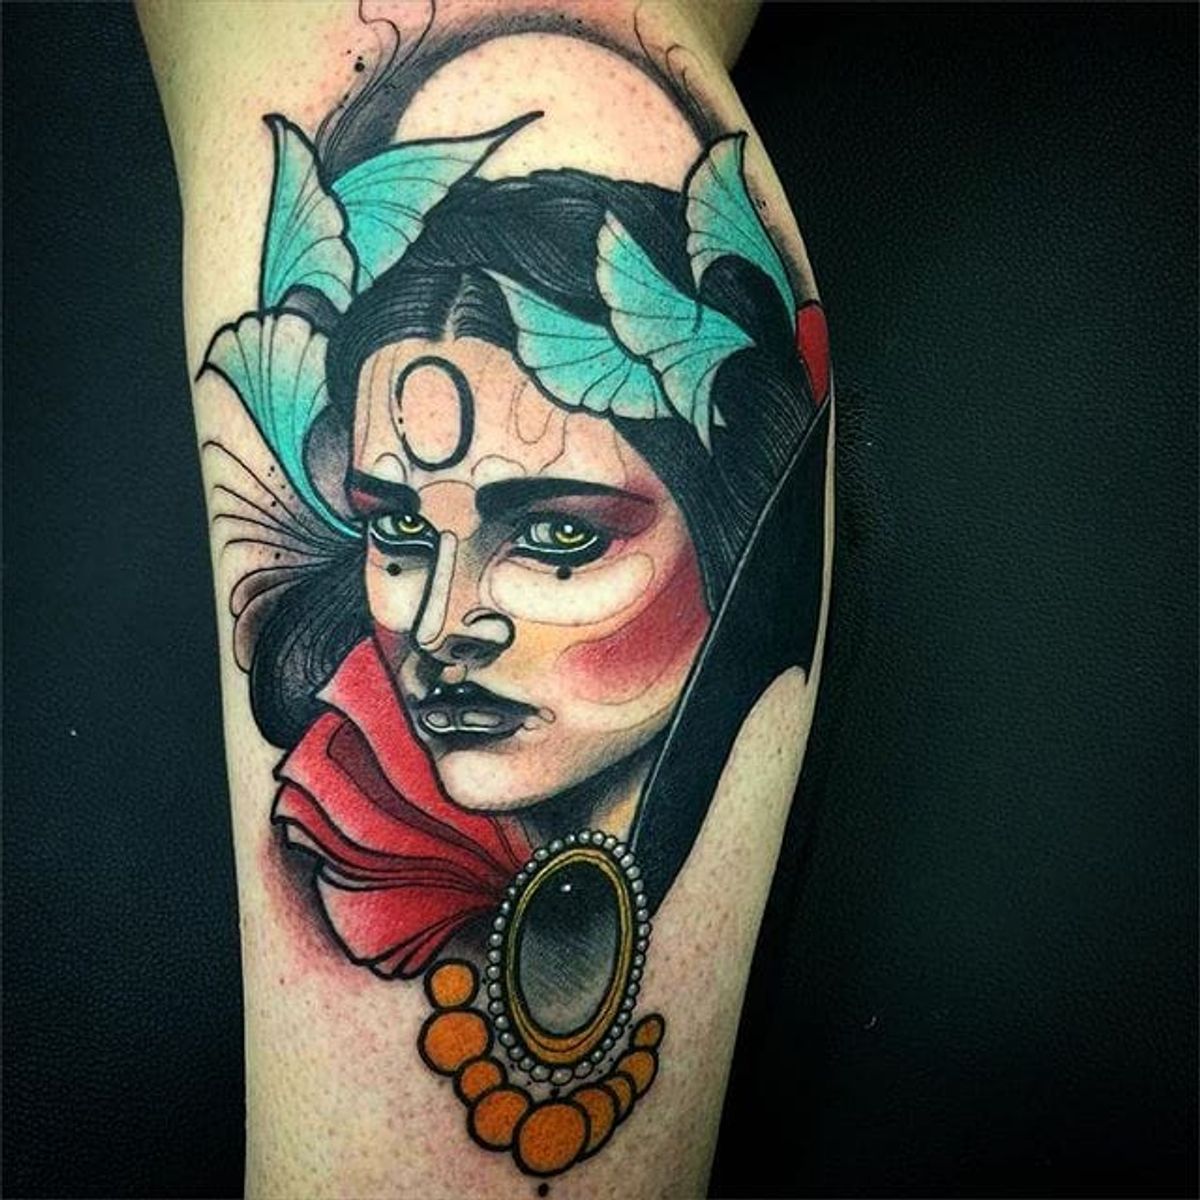 Tattoo Uploaded By Stacie Mayer Neo Trad Lady Tattoo By Jeff Snow Neotraditional Woman